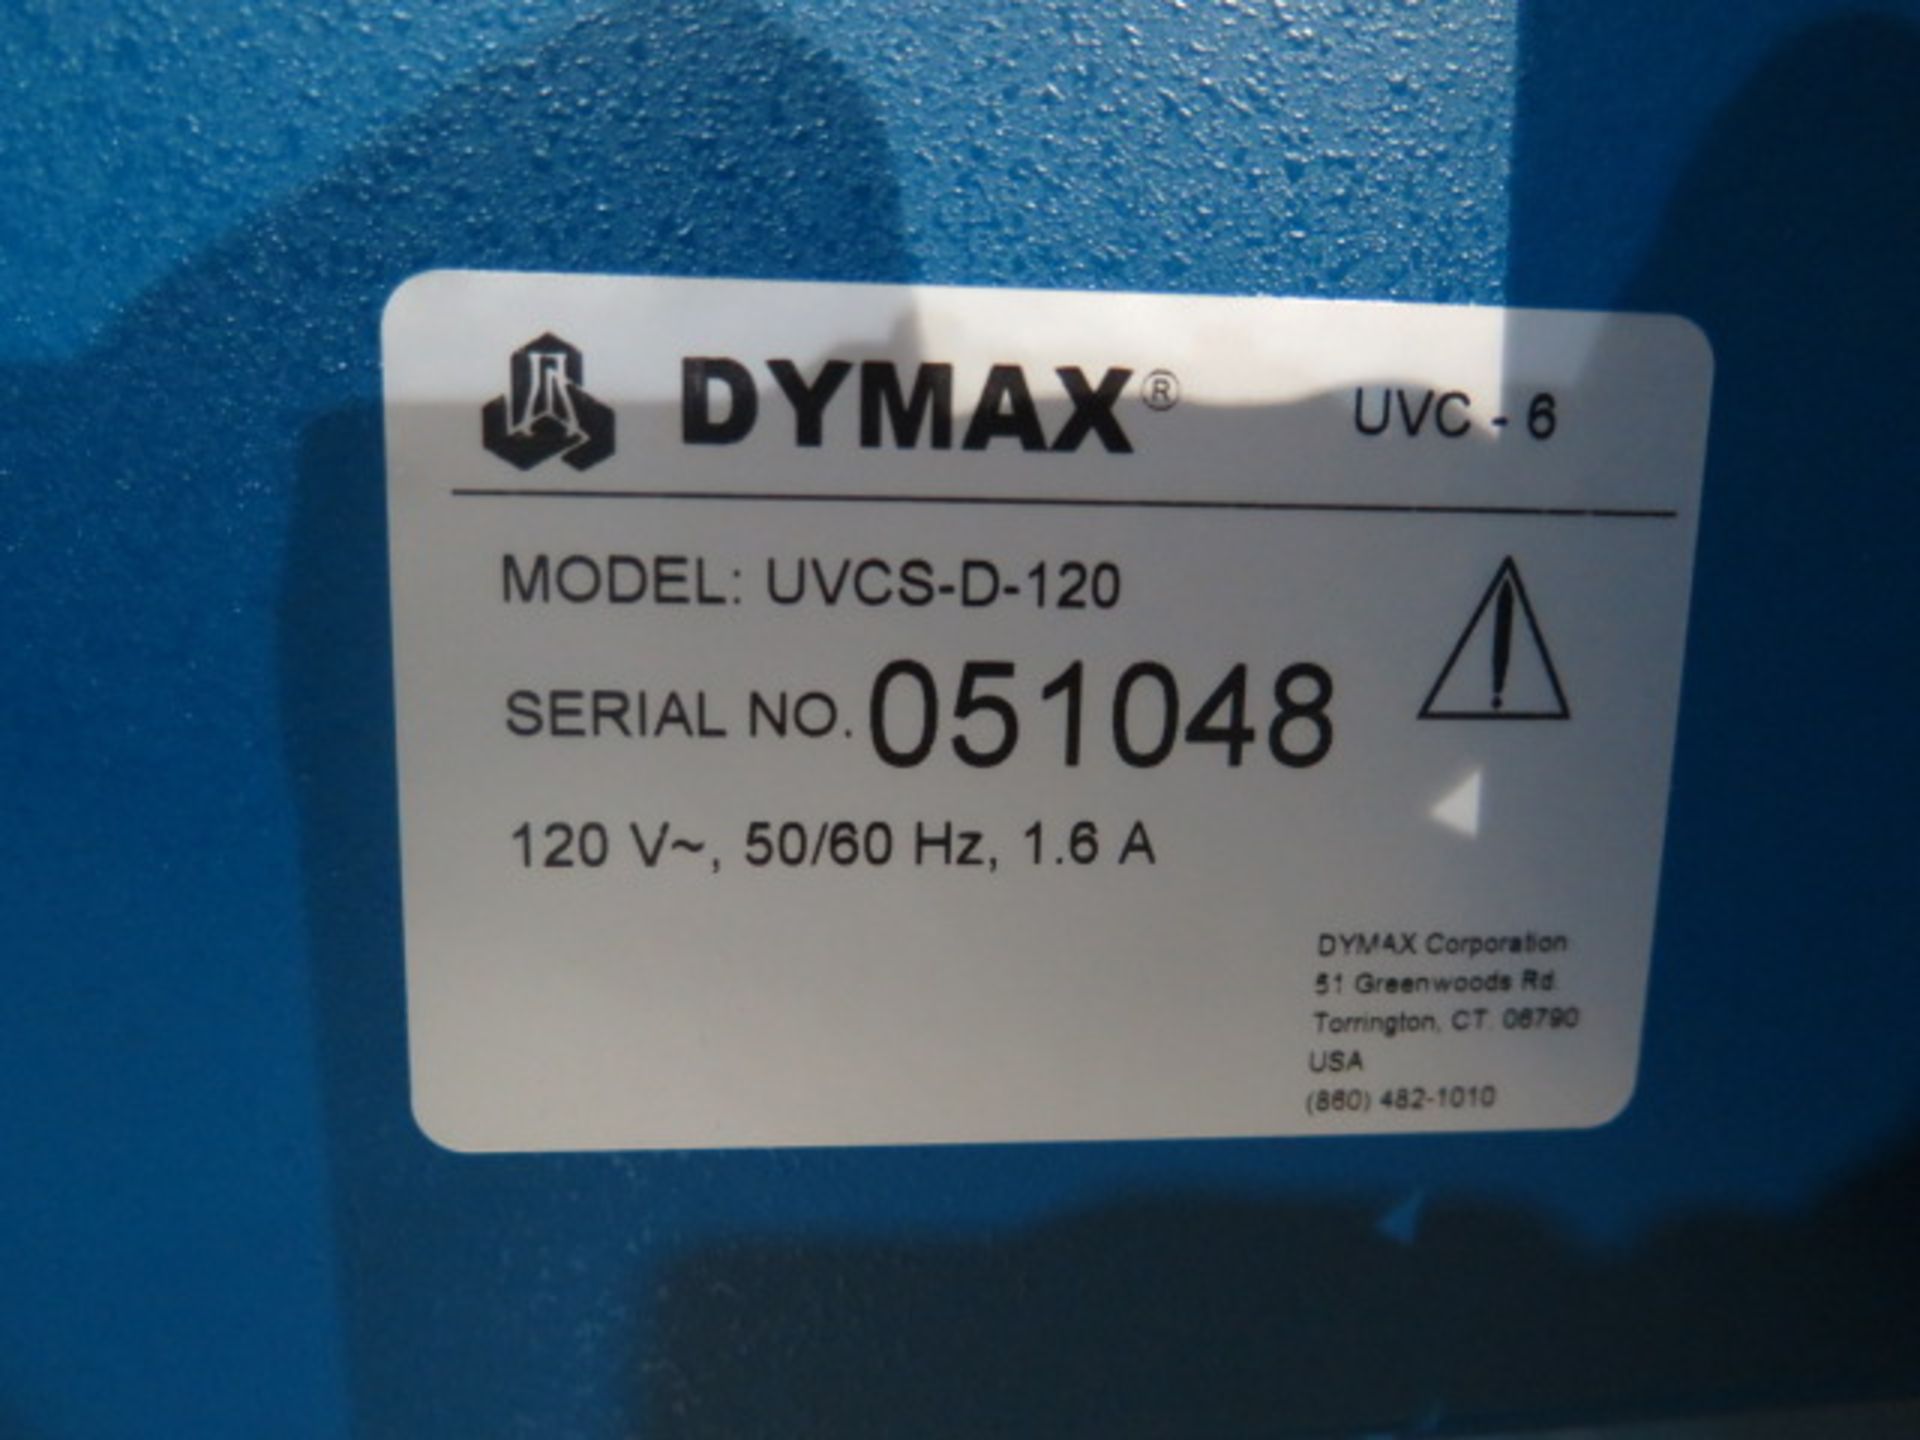 Dymax mdl. UVCS-D-120 Adhesive & Light Curing System s/n 051048 w/ 12” Thru Feed Belt (SOLD AS- - Image 10 of 10